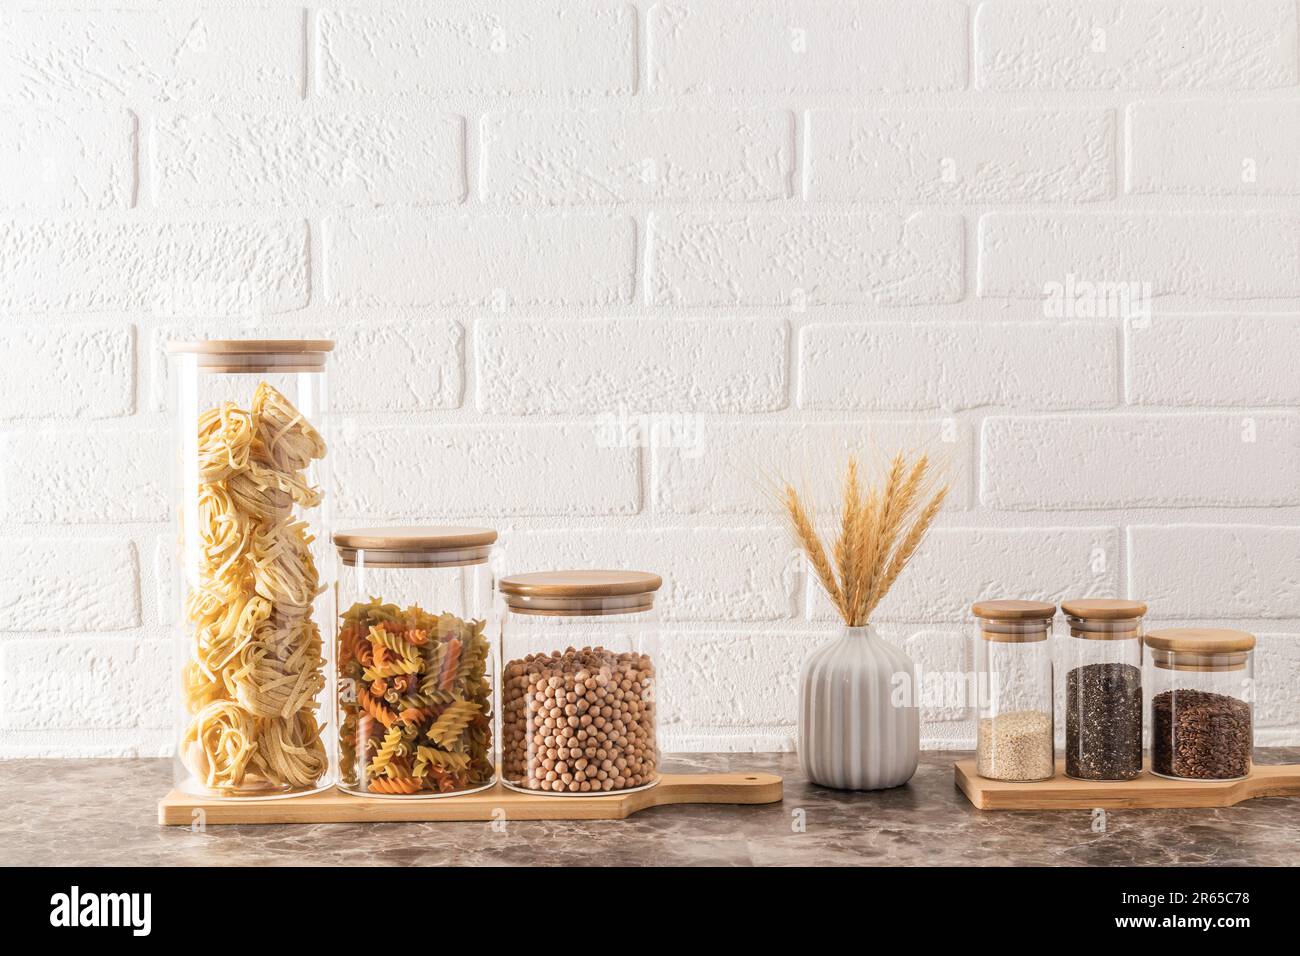 https://c8.alamy.com/comp/2R65C78/compact-stylish-storage-of-bulk-products-in-glass-jars-with-bamboo-lids-front-view-white-brick-wall-kitchen-background-2R65C78.jpg